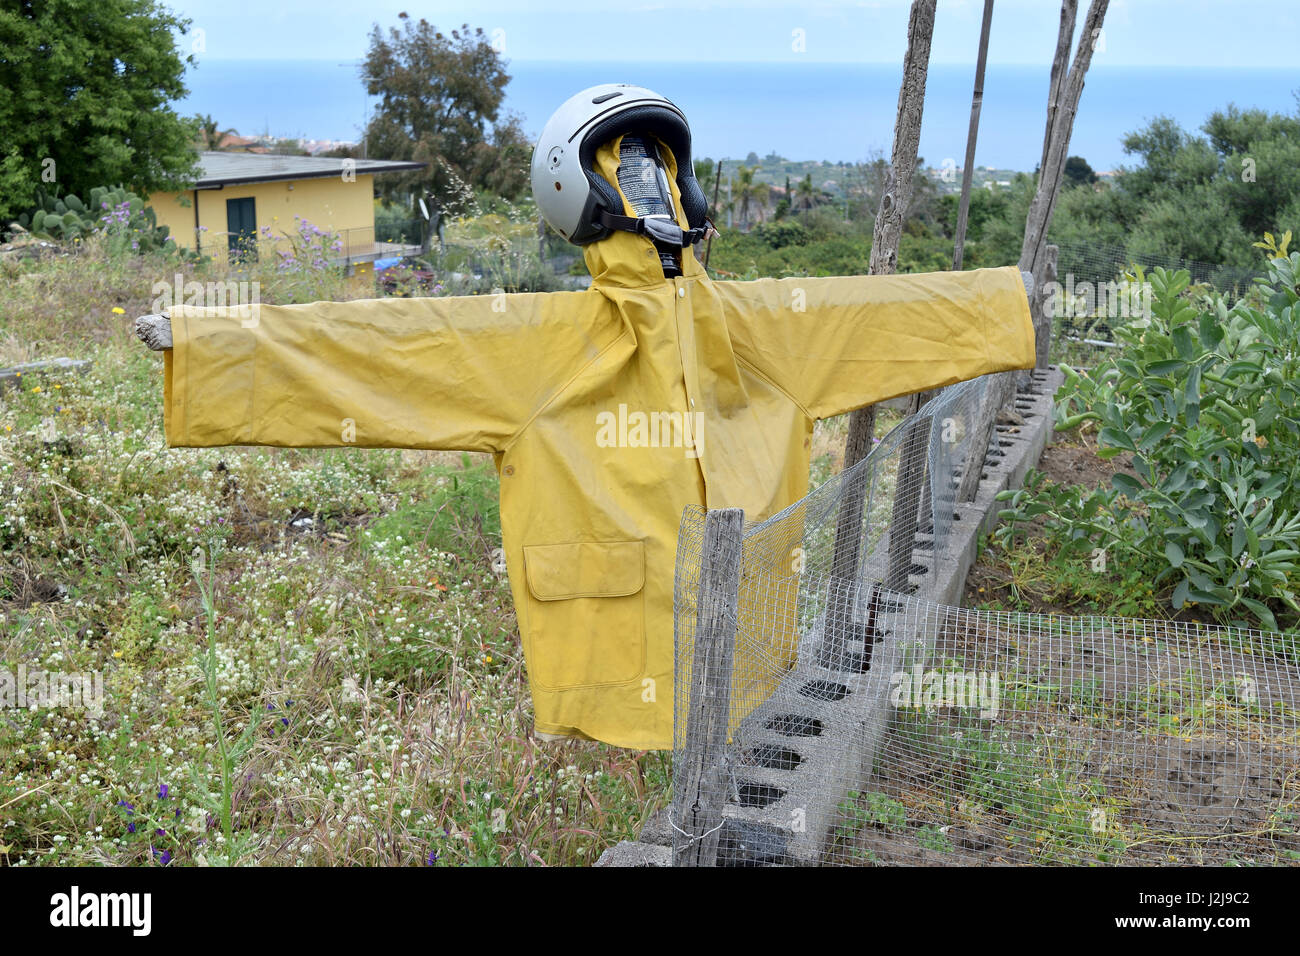 Extravagant scarecrow realized with a helmet and raincoat Stock Photo